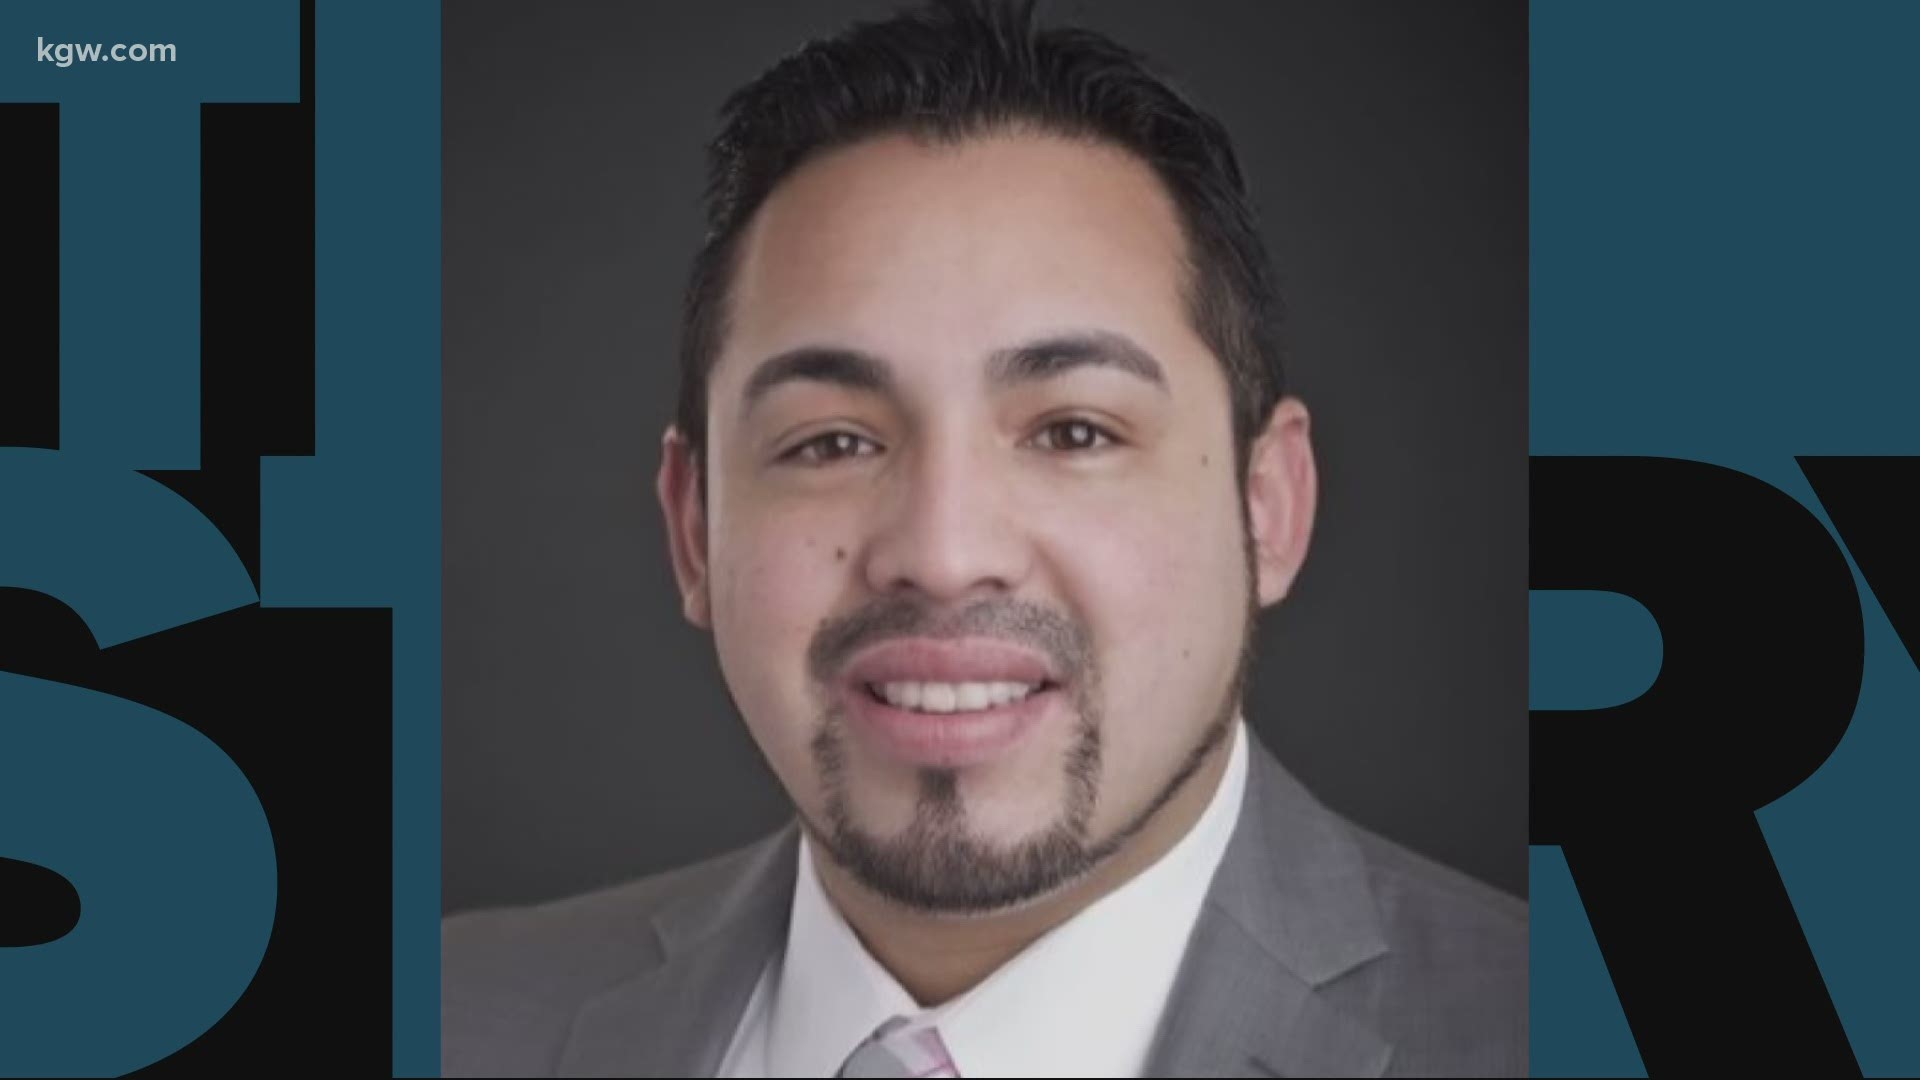 Rep. Diego Hernandez’s conduct is being put under the microscope.